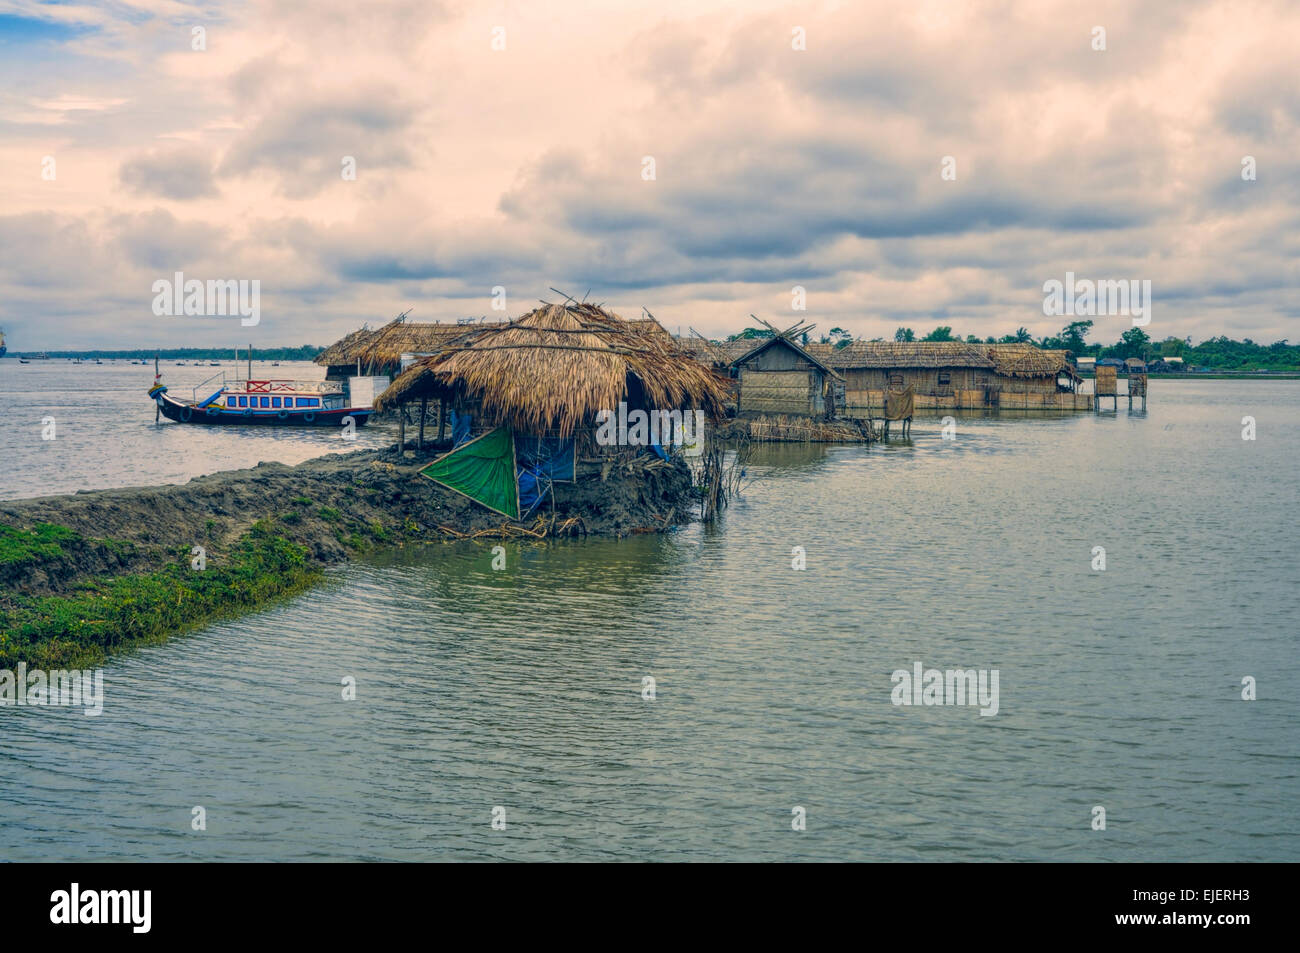 Scenic view of traditional village in Bangladesh Stock Photo